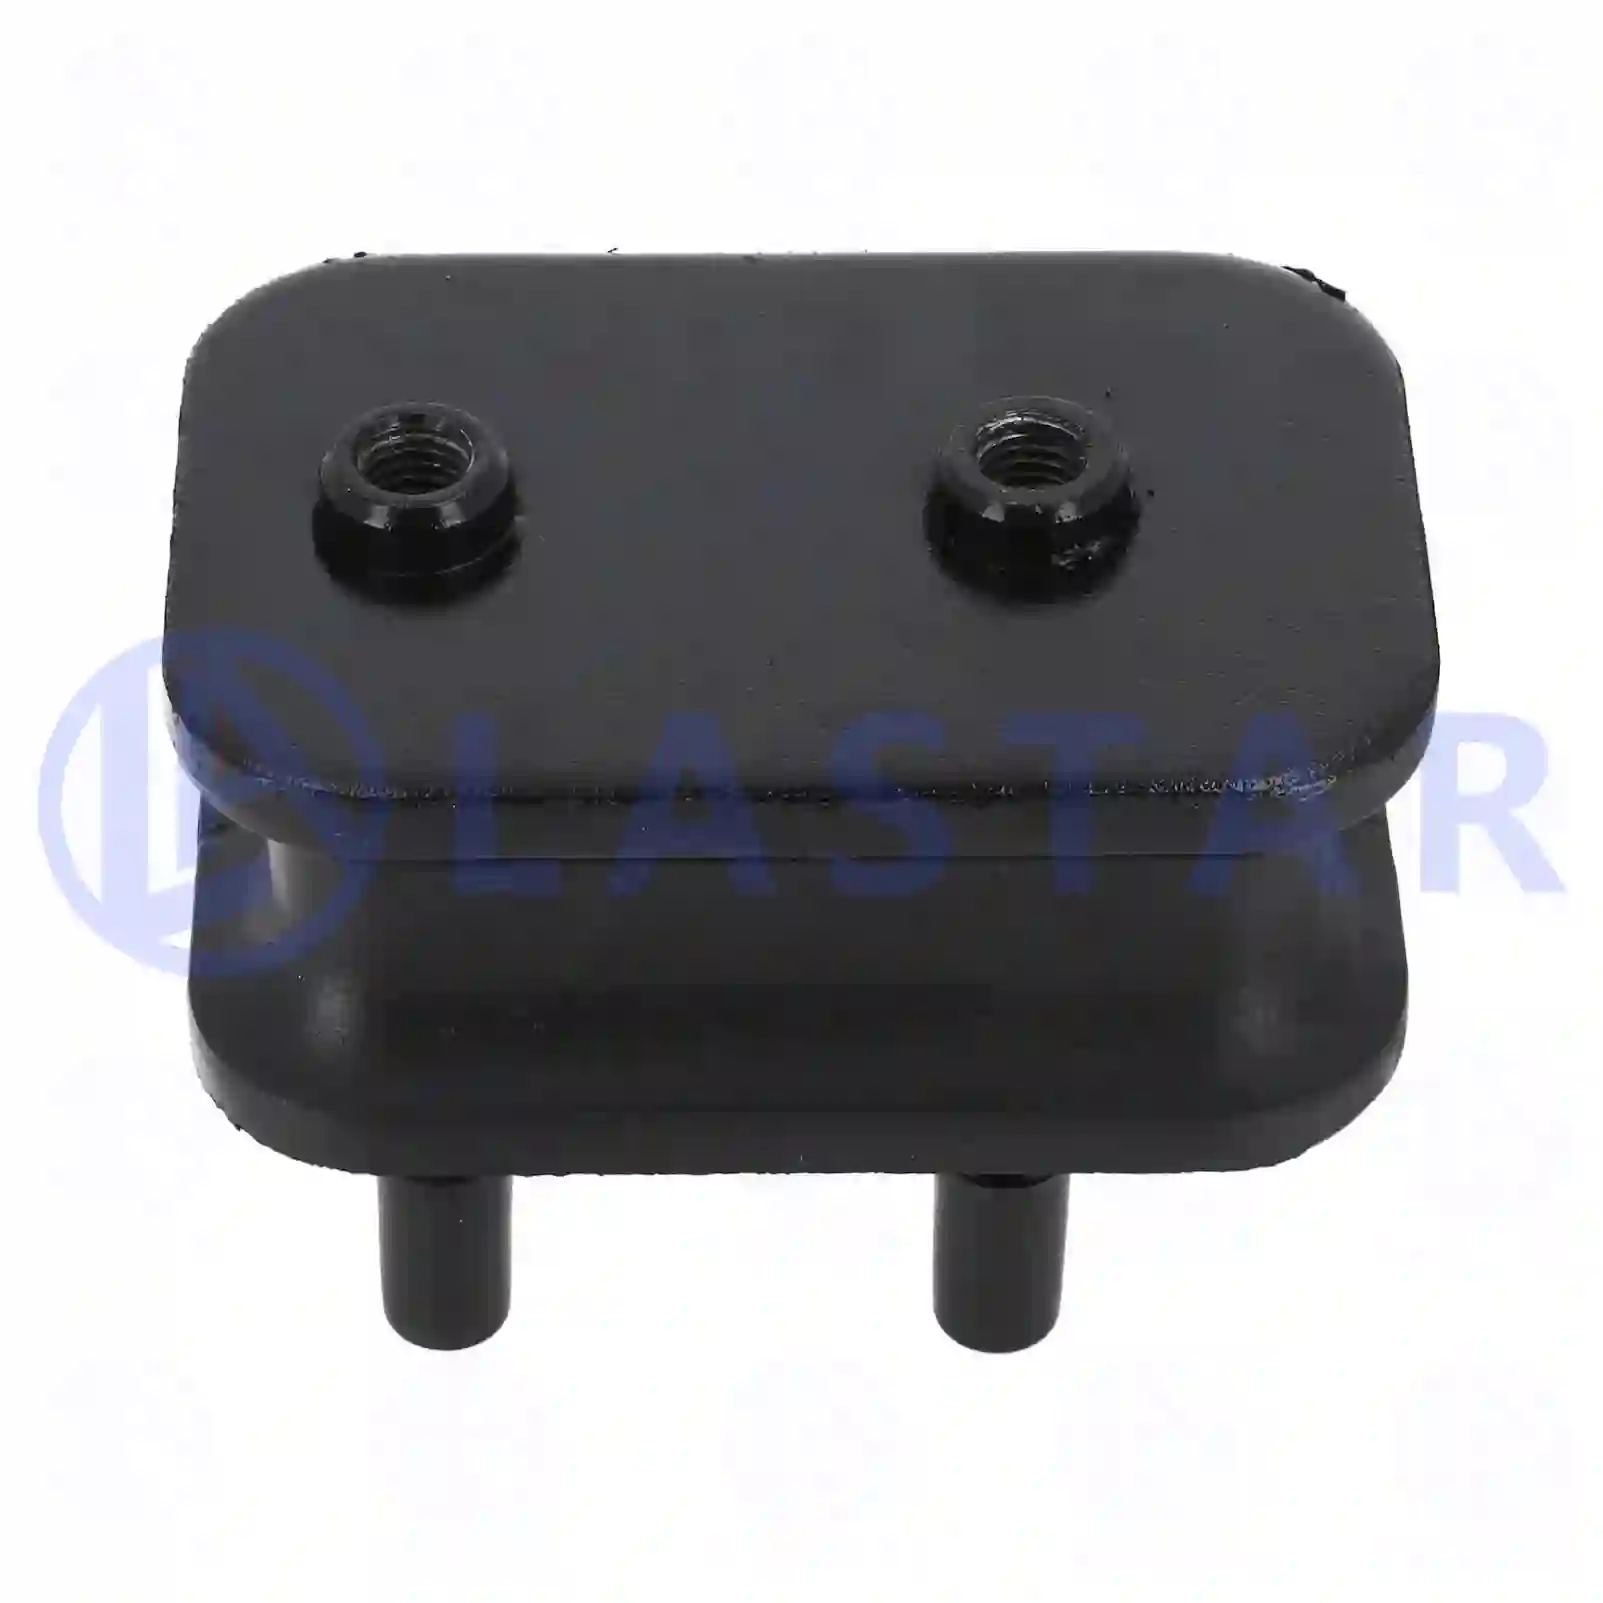 Engine mounting, 77700058, 1607468, ZG01098-0008, , , , ||  77700058 Lastar Spare Part | Truck Spare Parts, Auotomotive Spare Parts Engine mounting, 77700058, 1607468, ZG01098-0008, , , , ||  77700058 Lastar Spare Part | Truck Spare Parts, Auotomotive Spare Parts